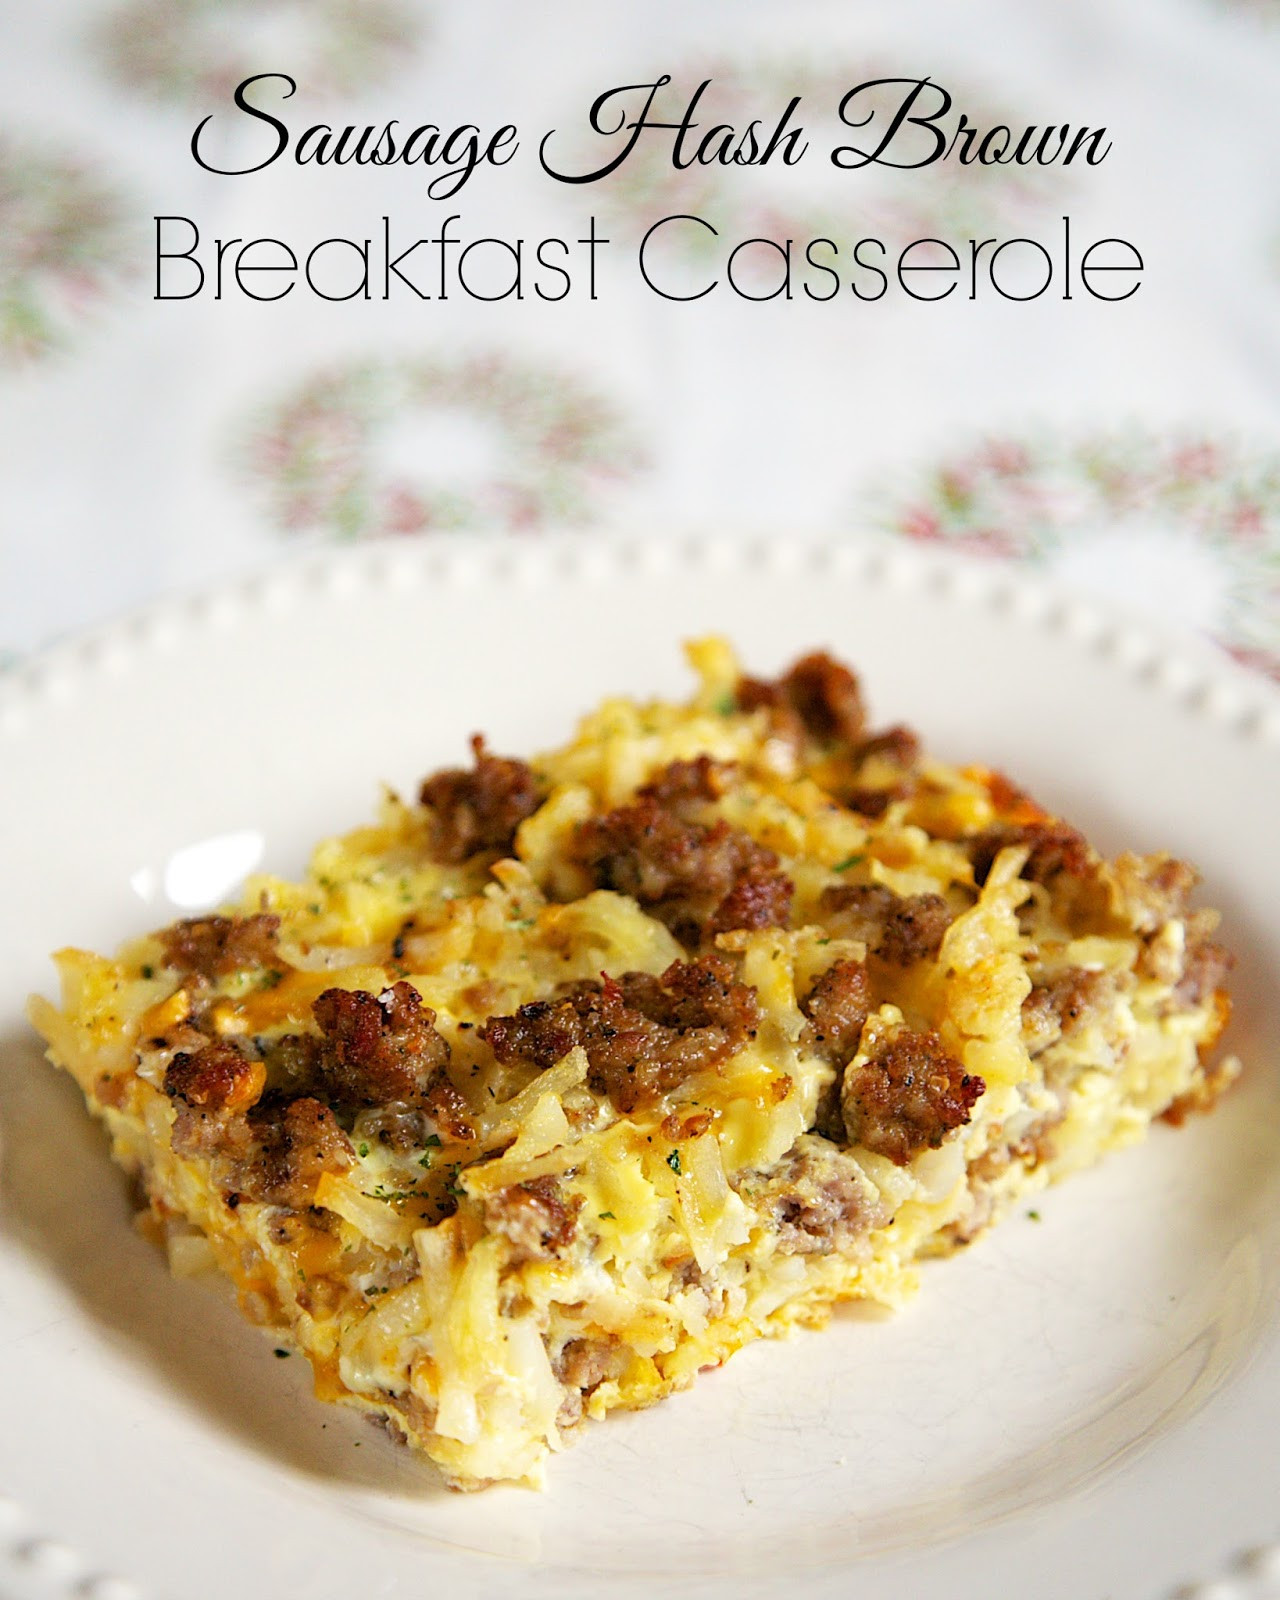 Overnight Breakfast Casserole with Hash Browns and Sausage and Eggs Elegant Sausage Hash Brown Breakfast Casserole